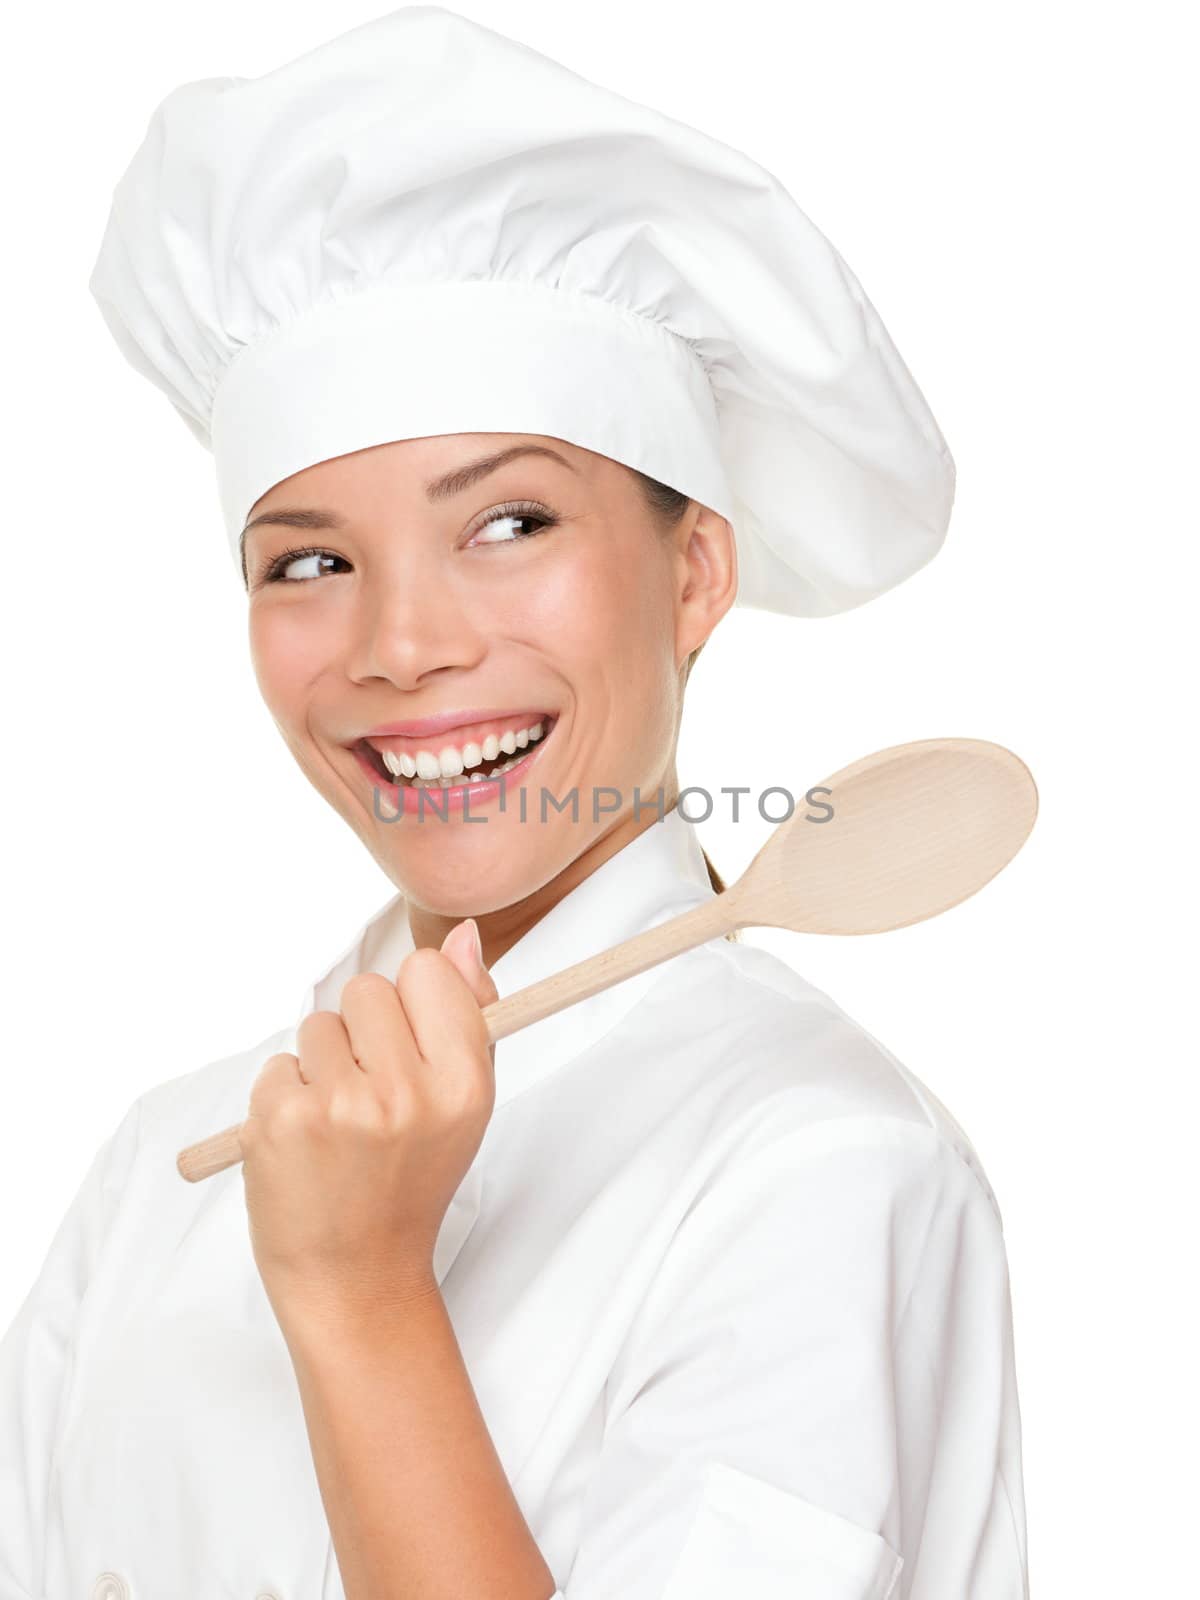 Chef woman smiling happy. Cook, chef or baker looking over should at copy space holding wooden spoon. Beautiful fresh Asian Caucasian female model isolated on white background.